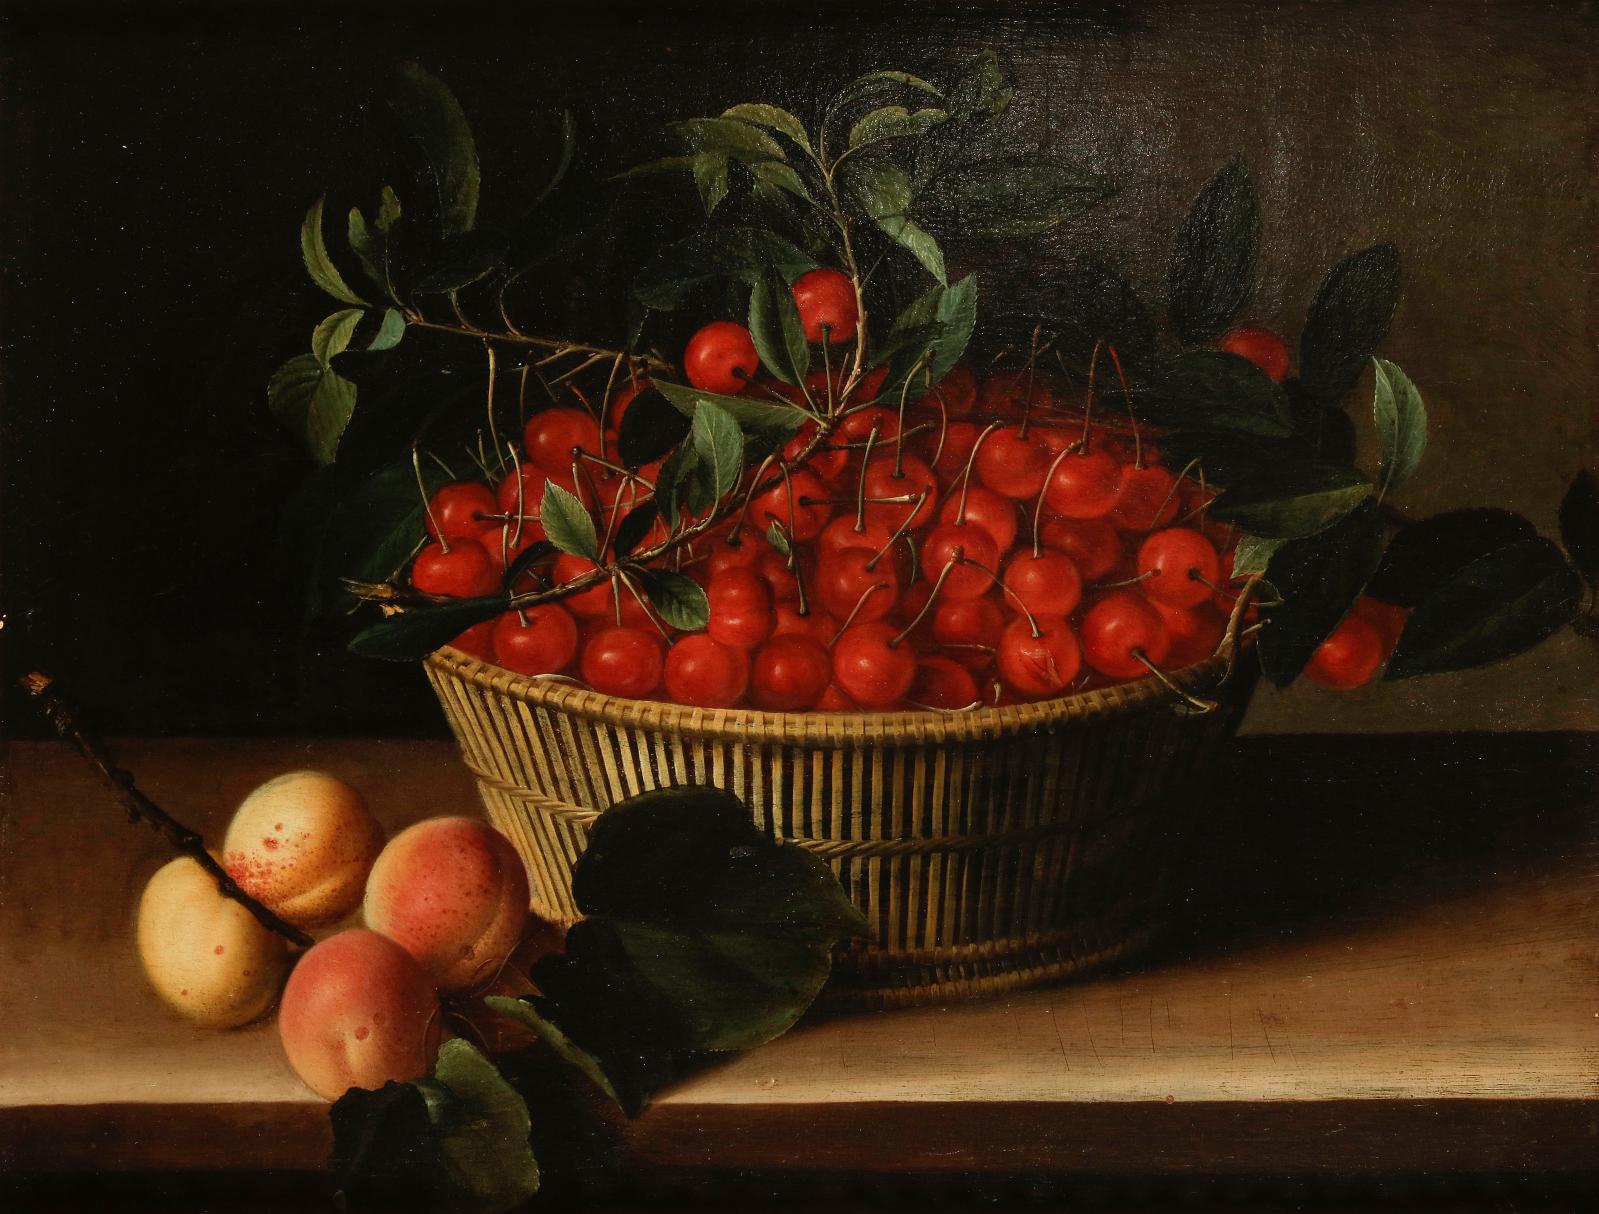 Jean Riechers Collection: Reviving the Still Life